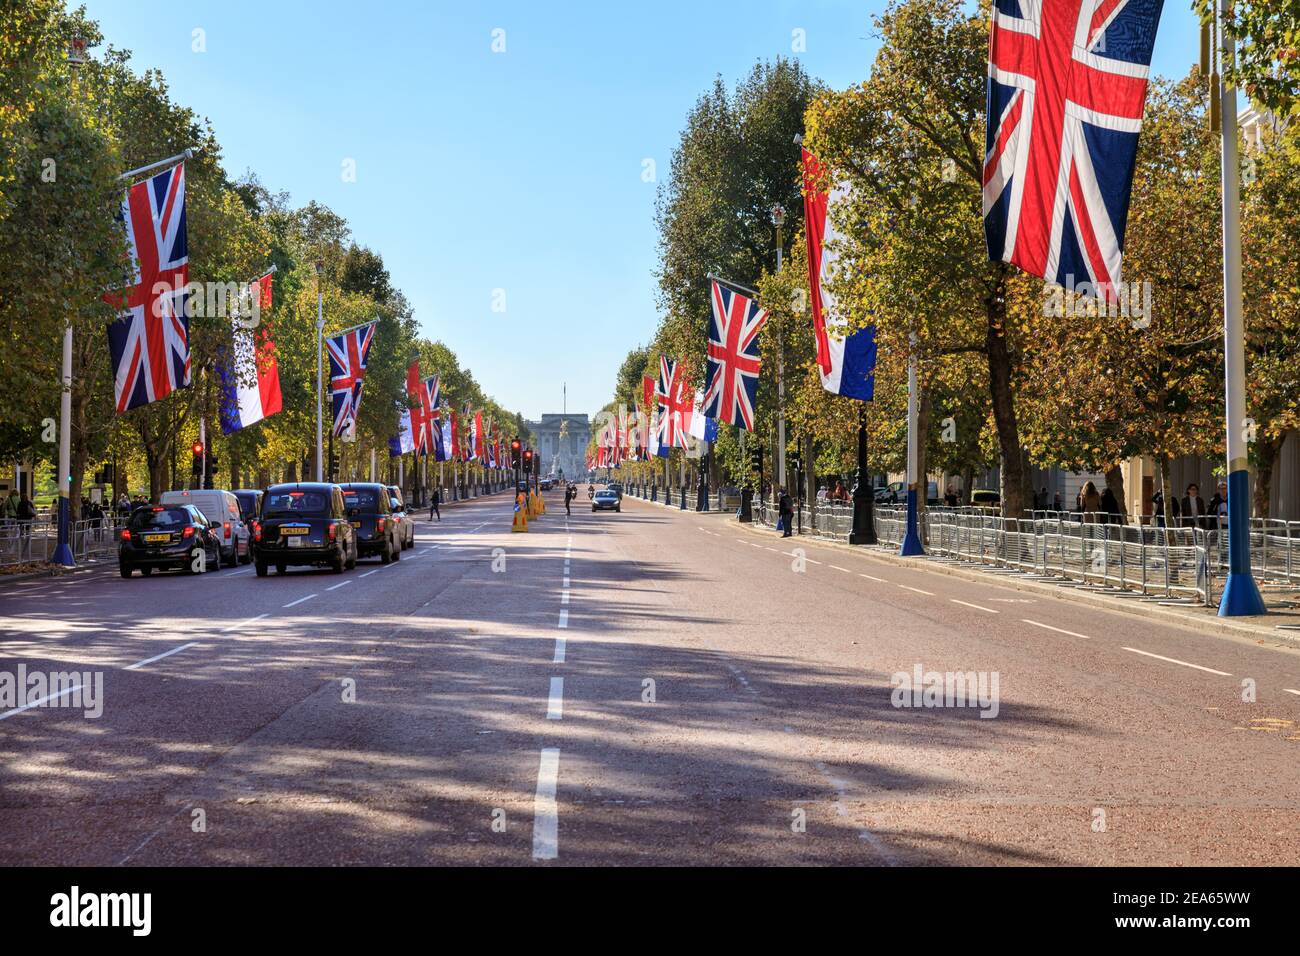 The Mall decorated with Union Jack and Dutch flags for the state visit of The King and Queen of The Netherlands, London, UK Stock Photo